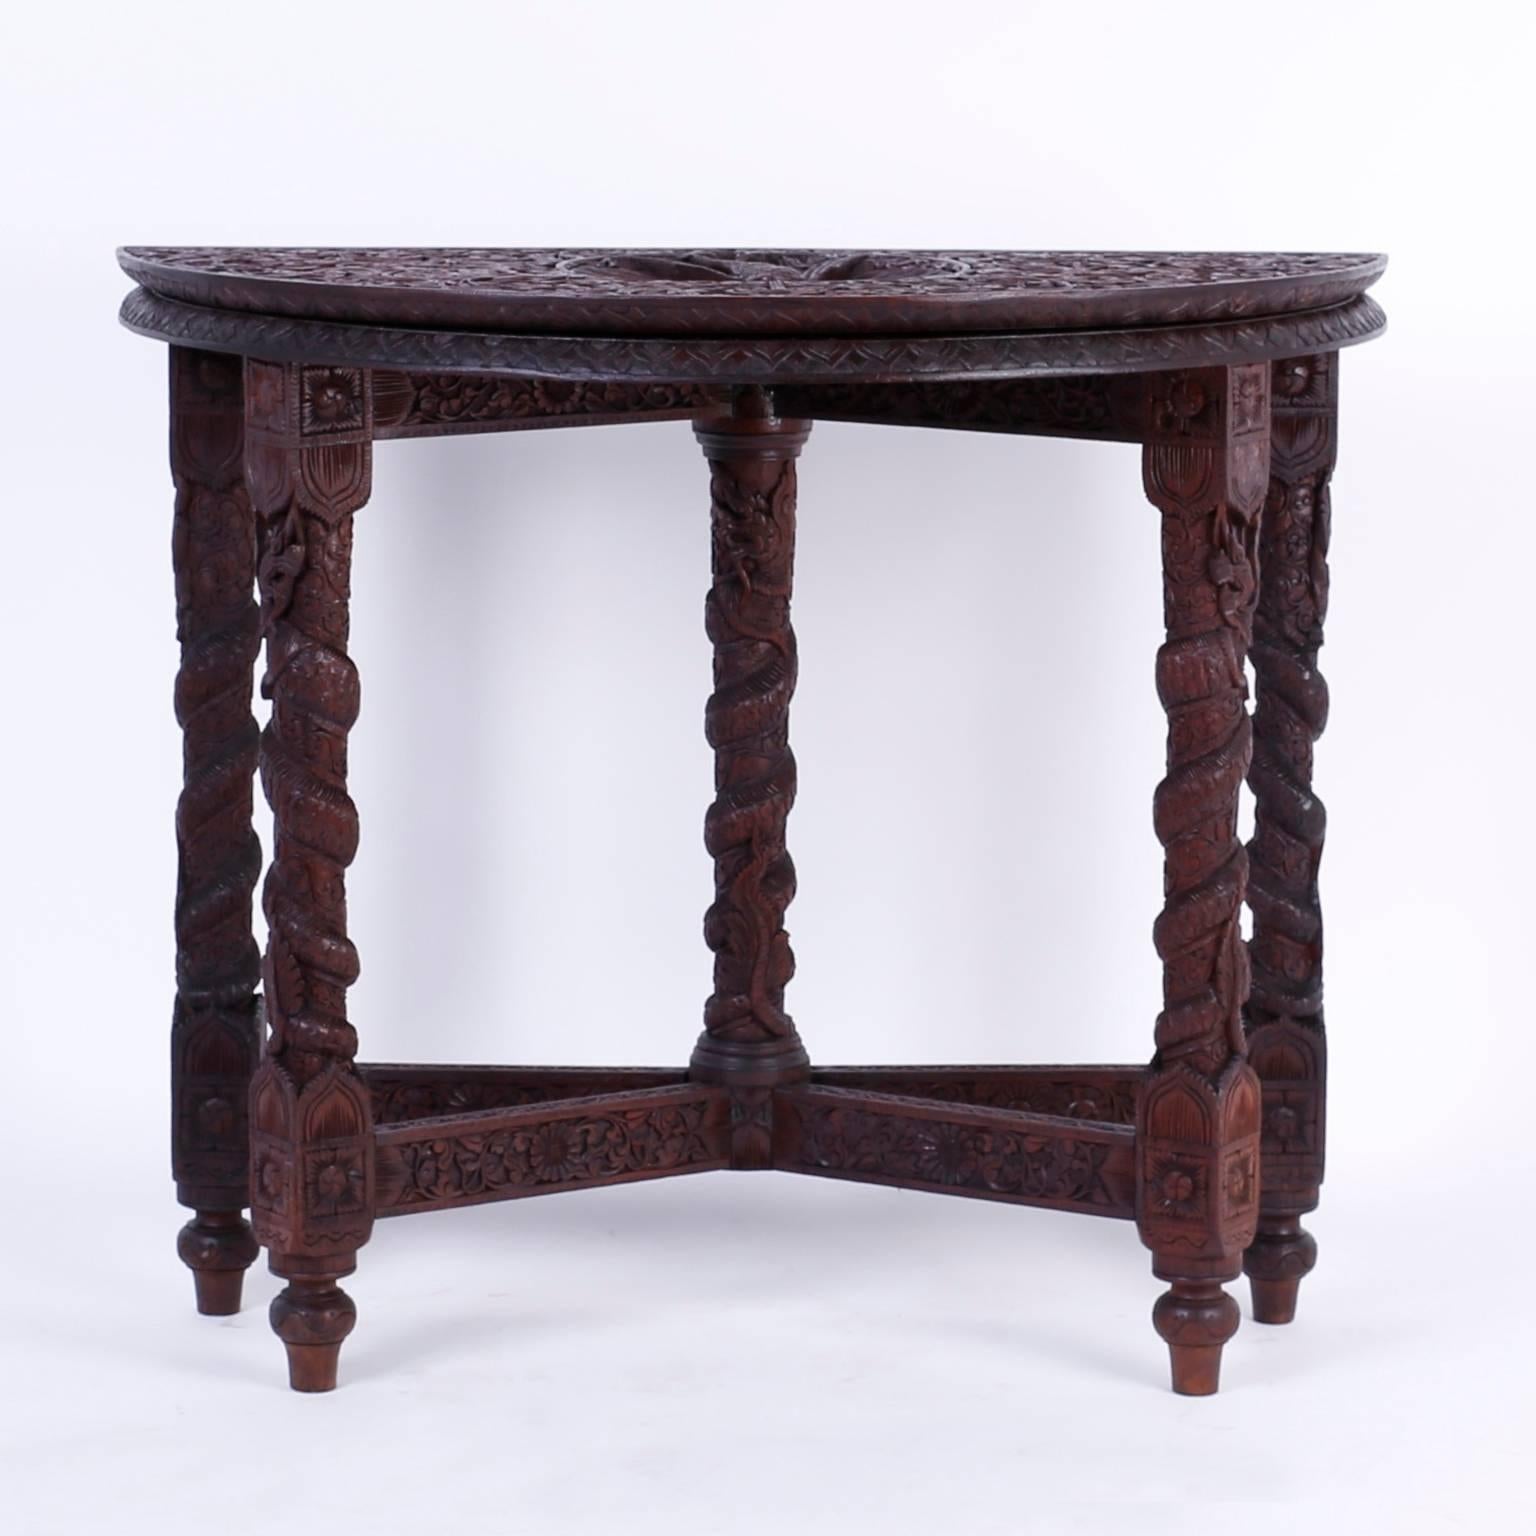 Inspired mahogany Anglo-Indian game table that when folded is a demilune console with an elaborately carved top featuring a centre peacock in a floral field. When opened to a round game table it reveals four panels of carved animals and an open